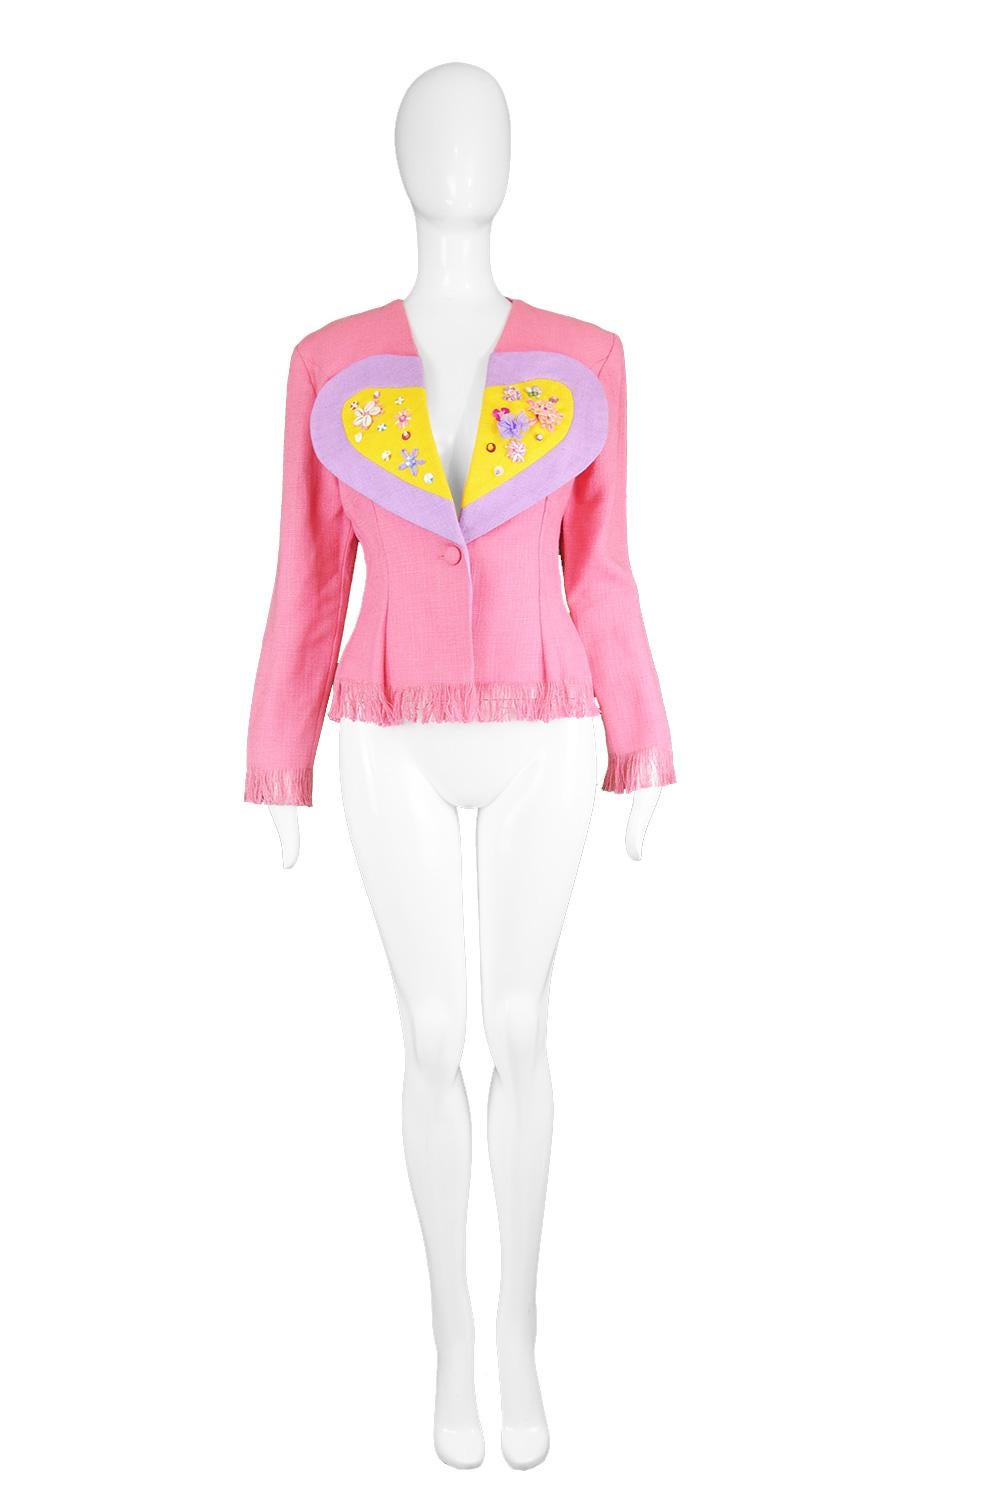 A super cute vintage jacket from the 90s by high quality British boutique label, Idol. In a bubblegum pink woven viscose (rayon) and linen fabric with yellow and light purple lapels that are shaped like a loveheart and embellished with beads, shells